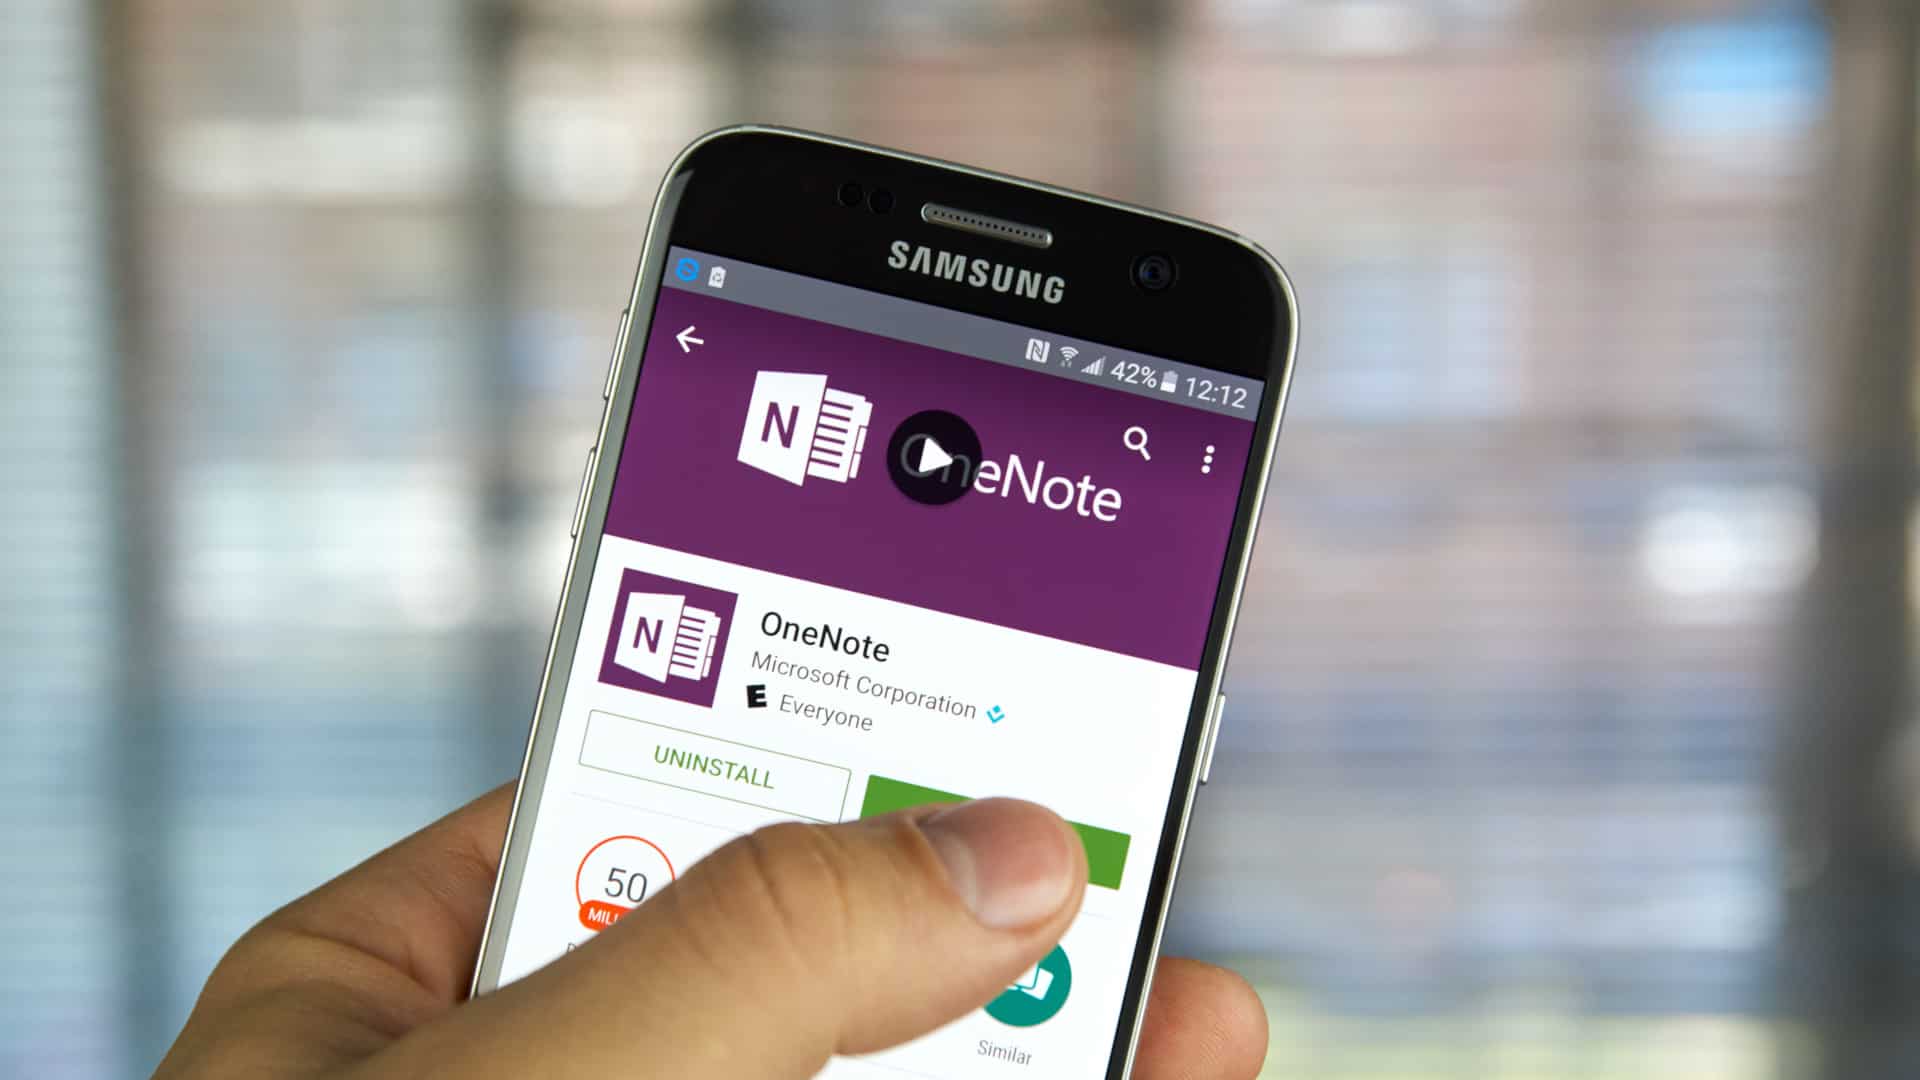 OneNote: Microsoft is stepping up security